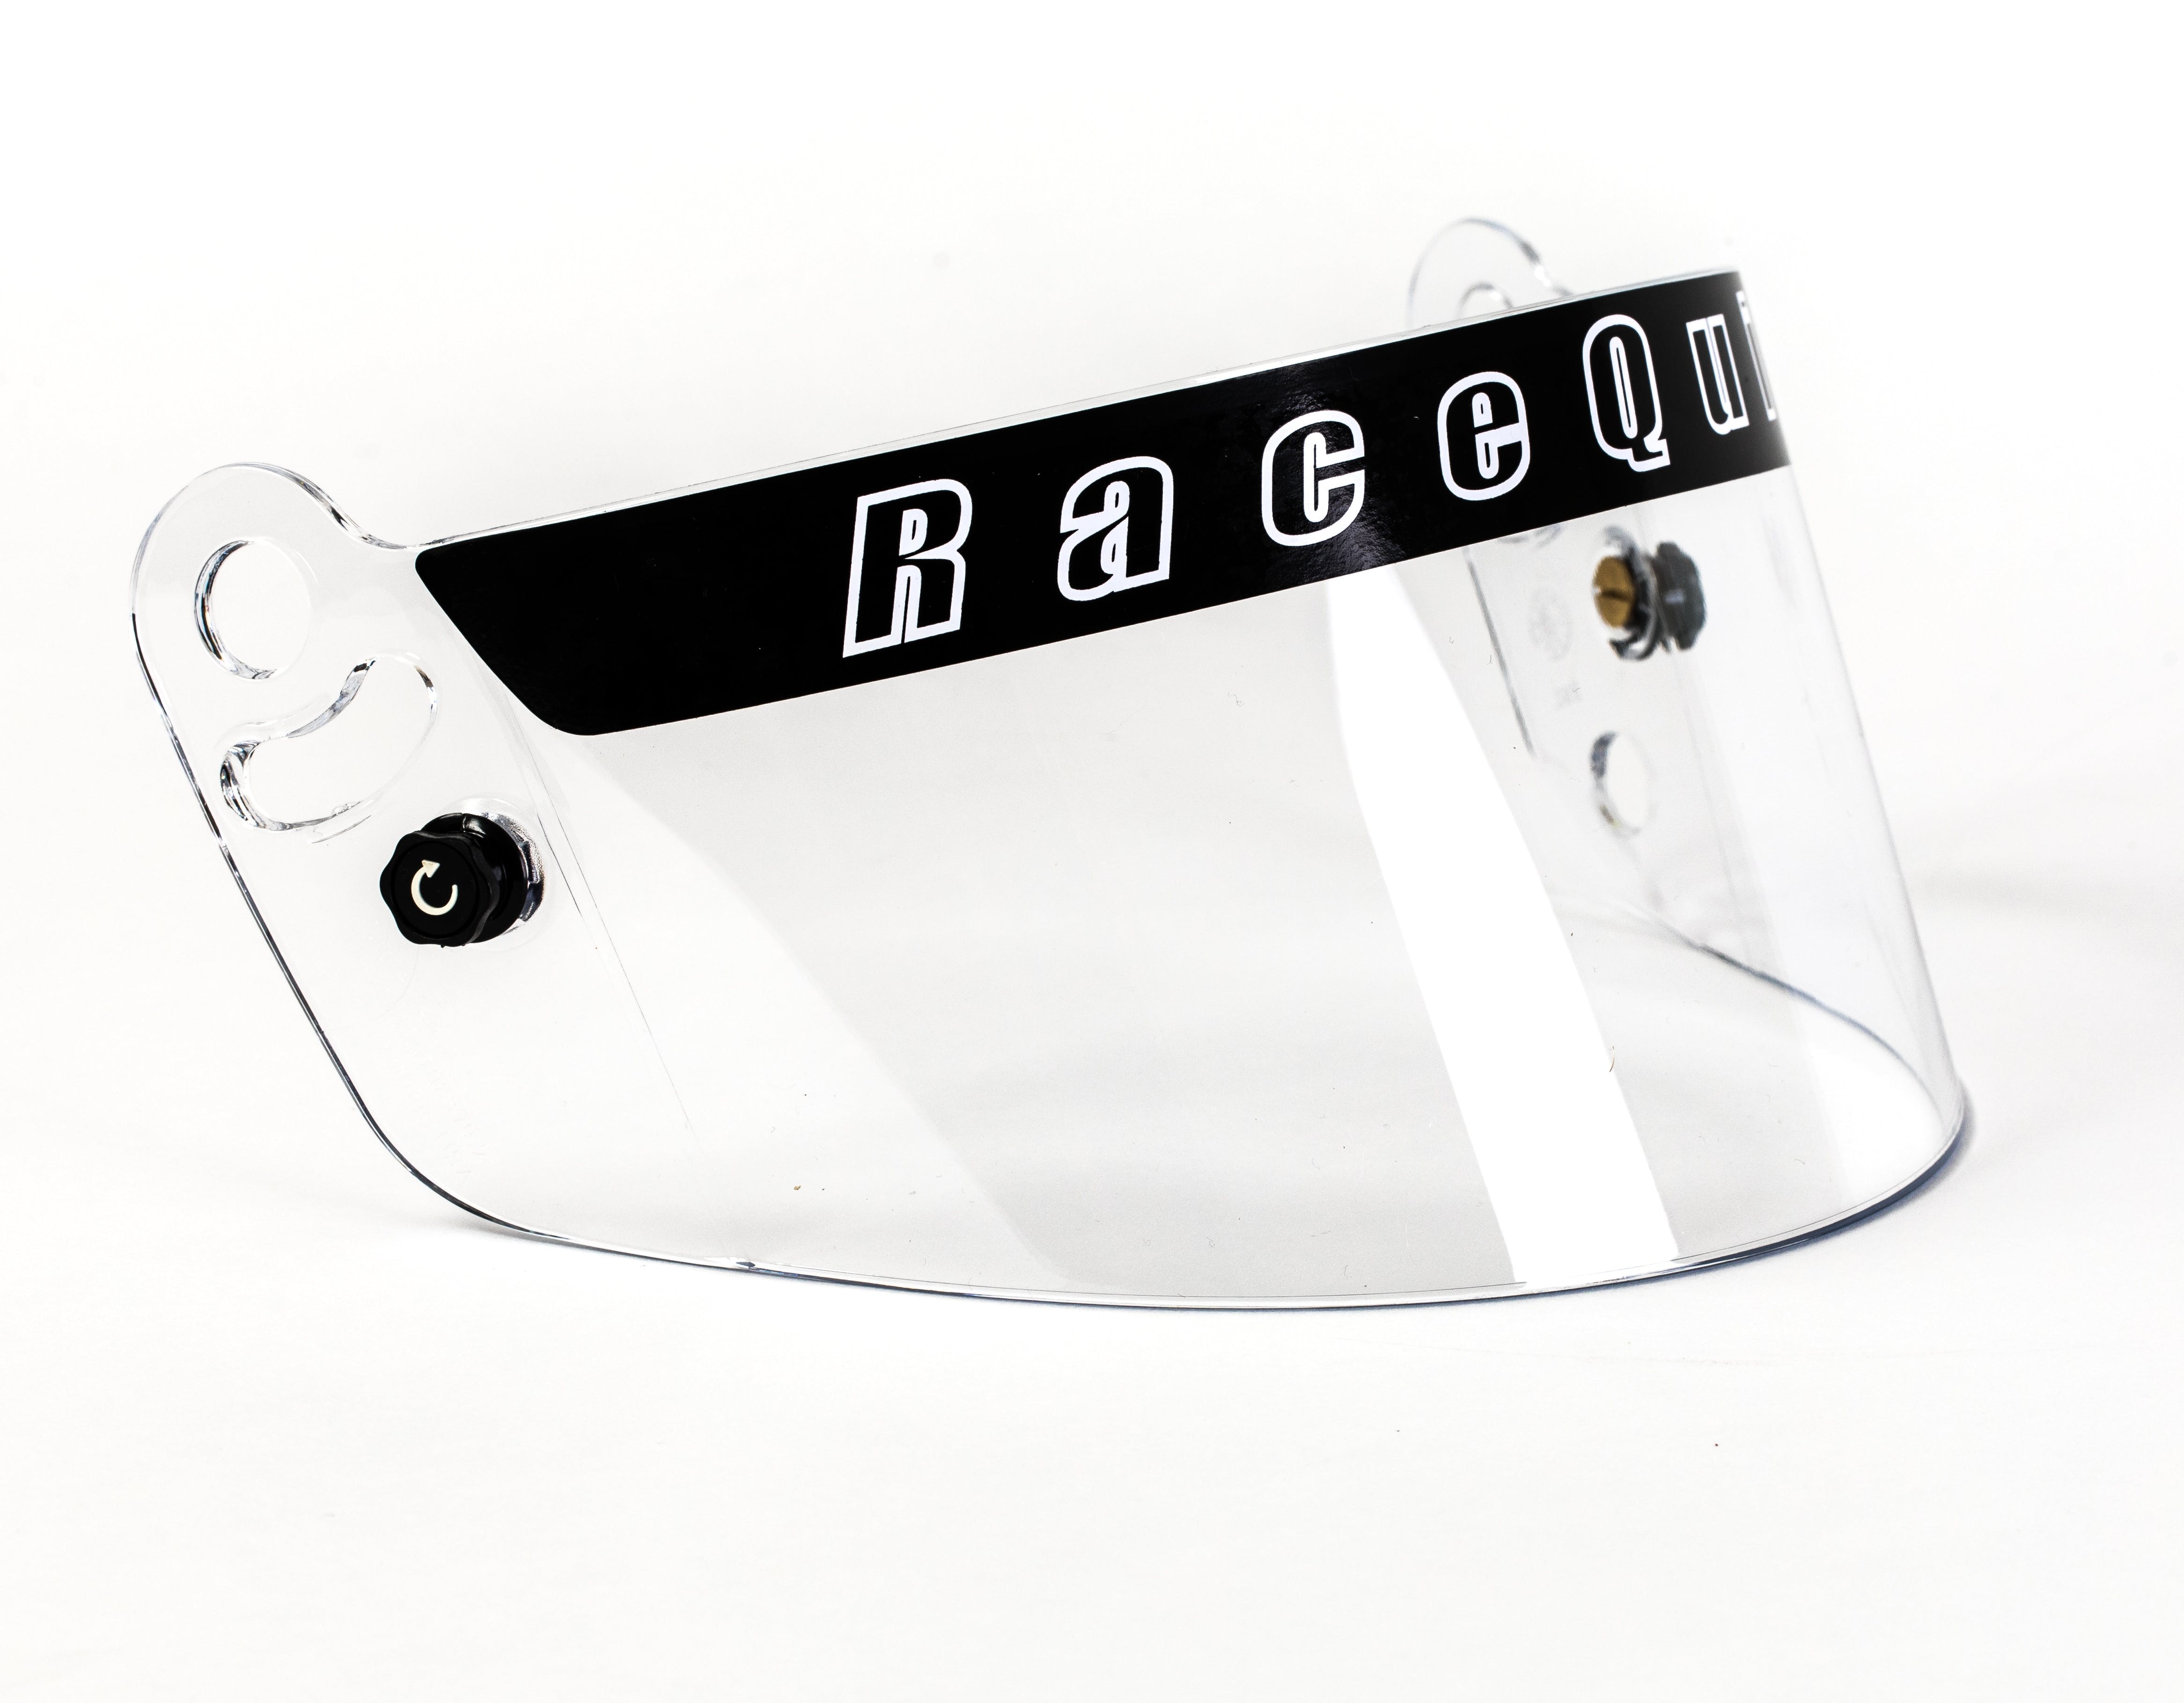 RaceQuip 204001 204 Series Helmet Face Shield (Clear) for PRO and Youth Helmets